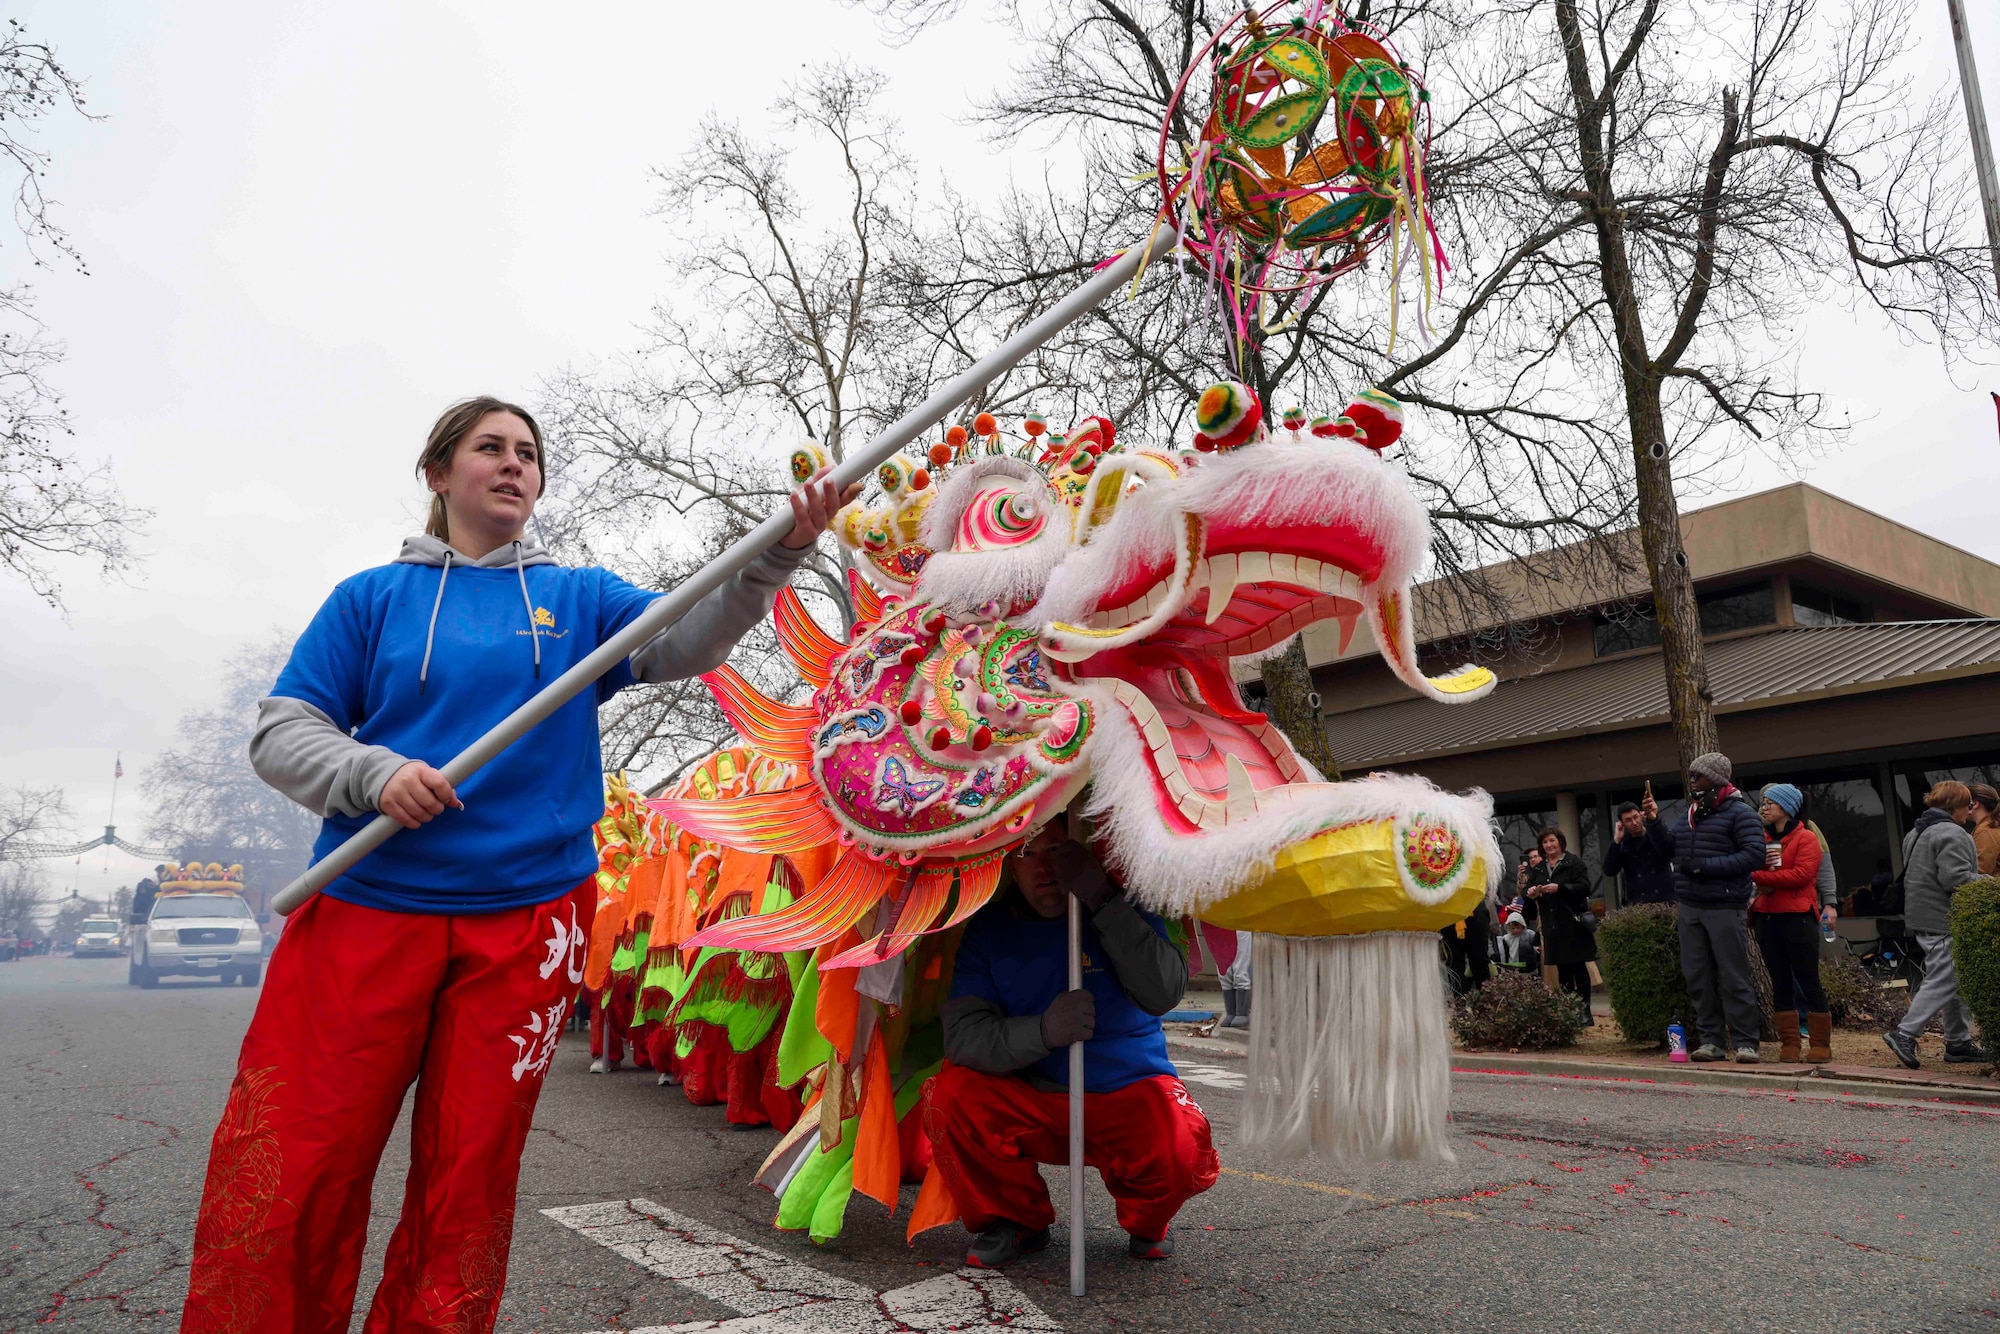 U.S. Air Force Senior Airman Zoey Martins, 9th Health Care Operations Squadron medical logistics technician, held the “pearl” for the Chinese dragon “Hong Wan Lung” carried by Airmen from Beale Air Force Base, Calif.  during the annual Bok Kai parade Feb, 25, 2023 in Marysville, Calif.